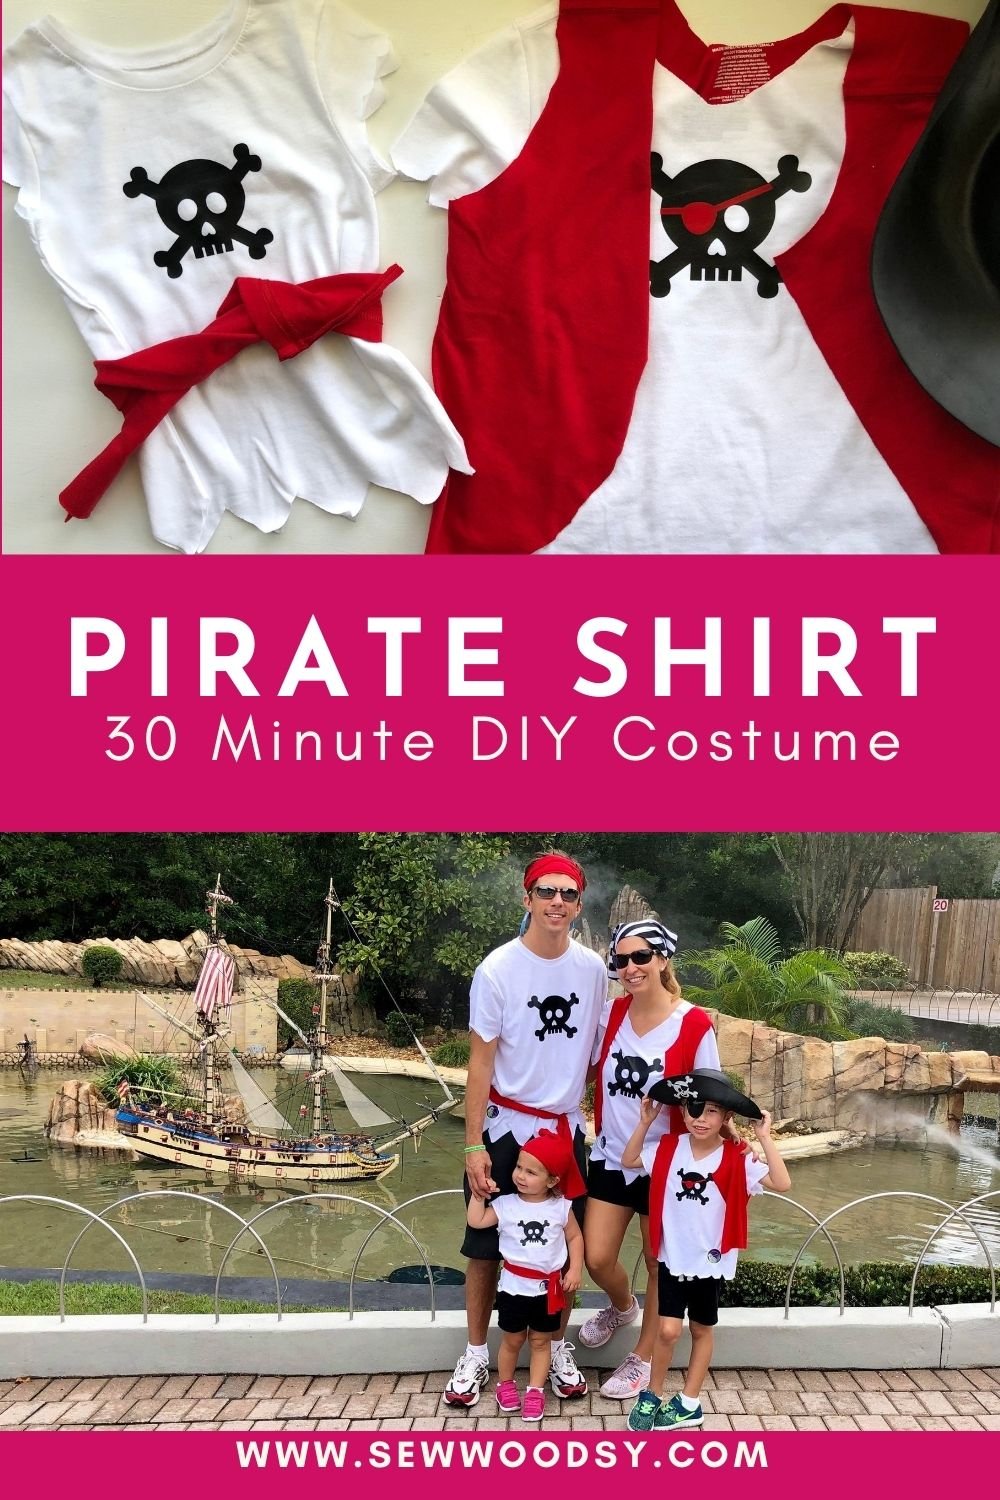 Two photos of pirate shirt costumes divided by text for Pinterest.